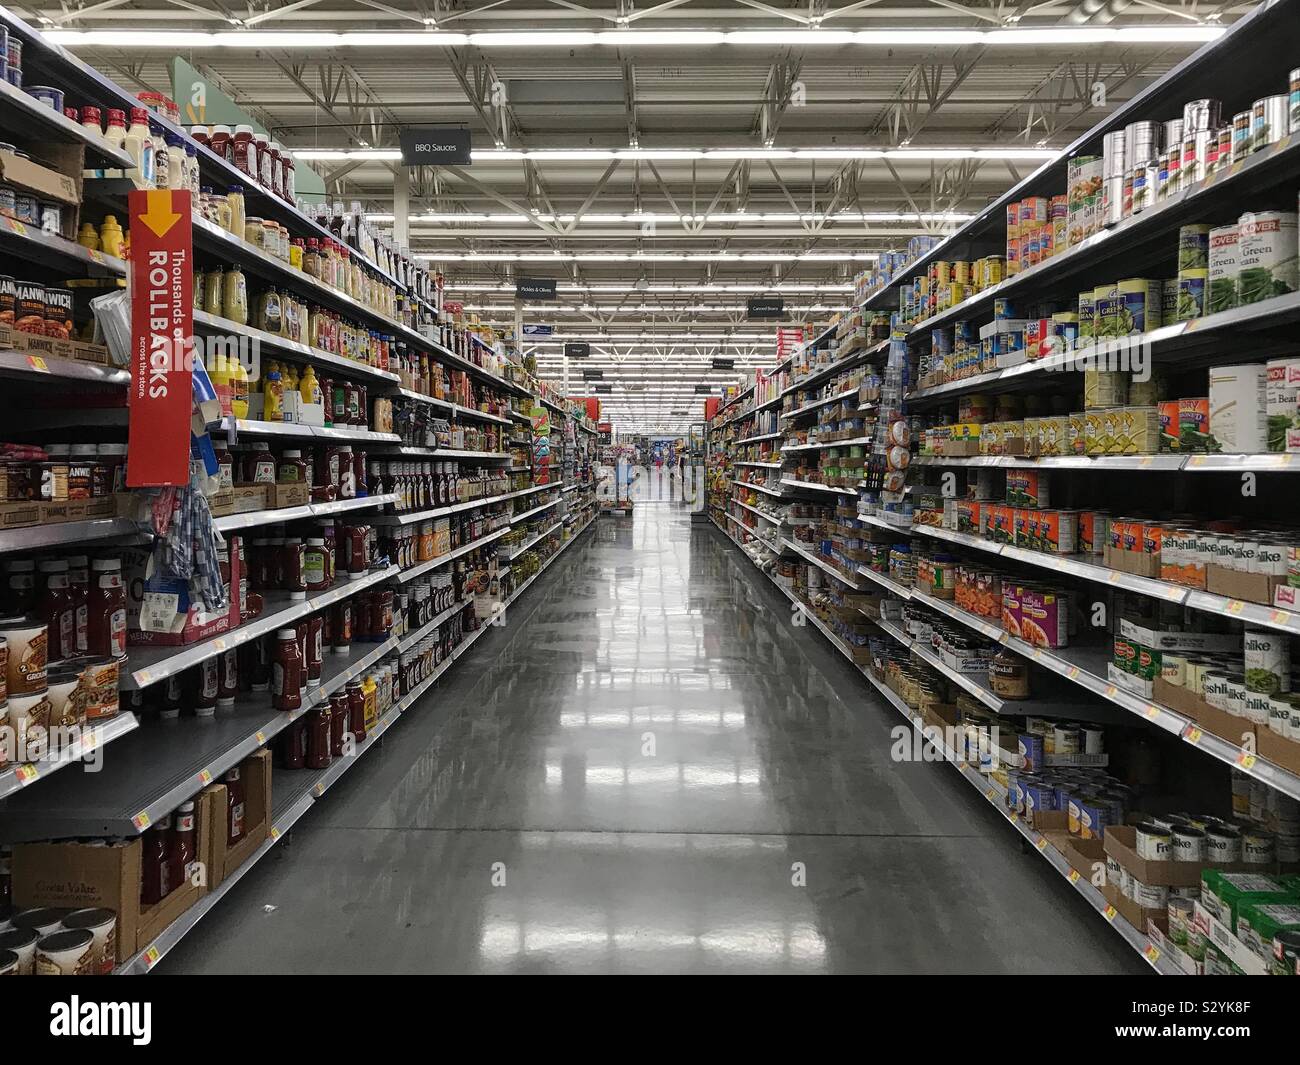 Columbus, Ohio/ USA - Sept. 7, 2019: Packaged food items for sale on shelves are shown inside a Walmart supermarket chain store. Stock Photo